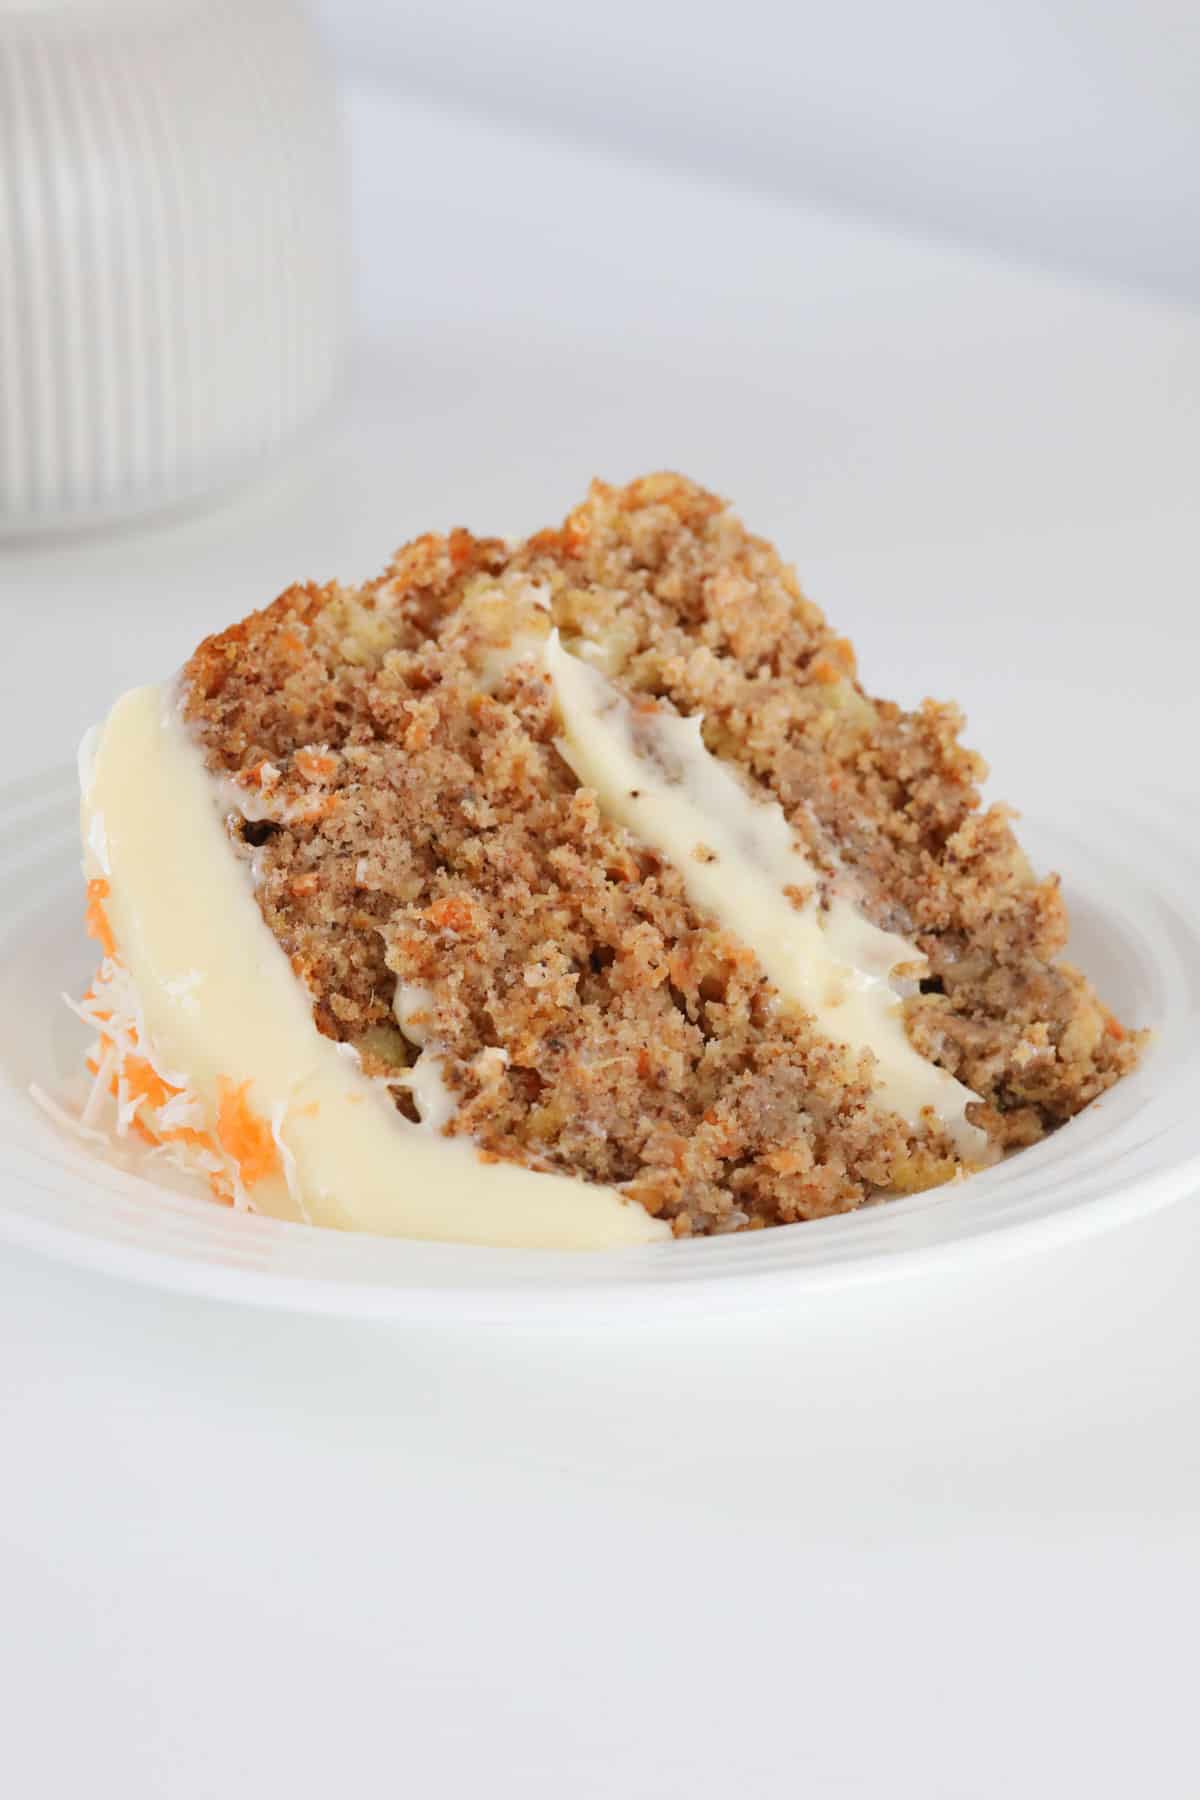 A slice of layered carrot cake with cream cheese frosting.